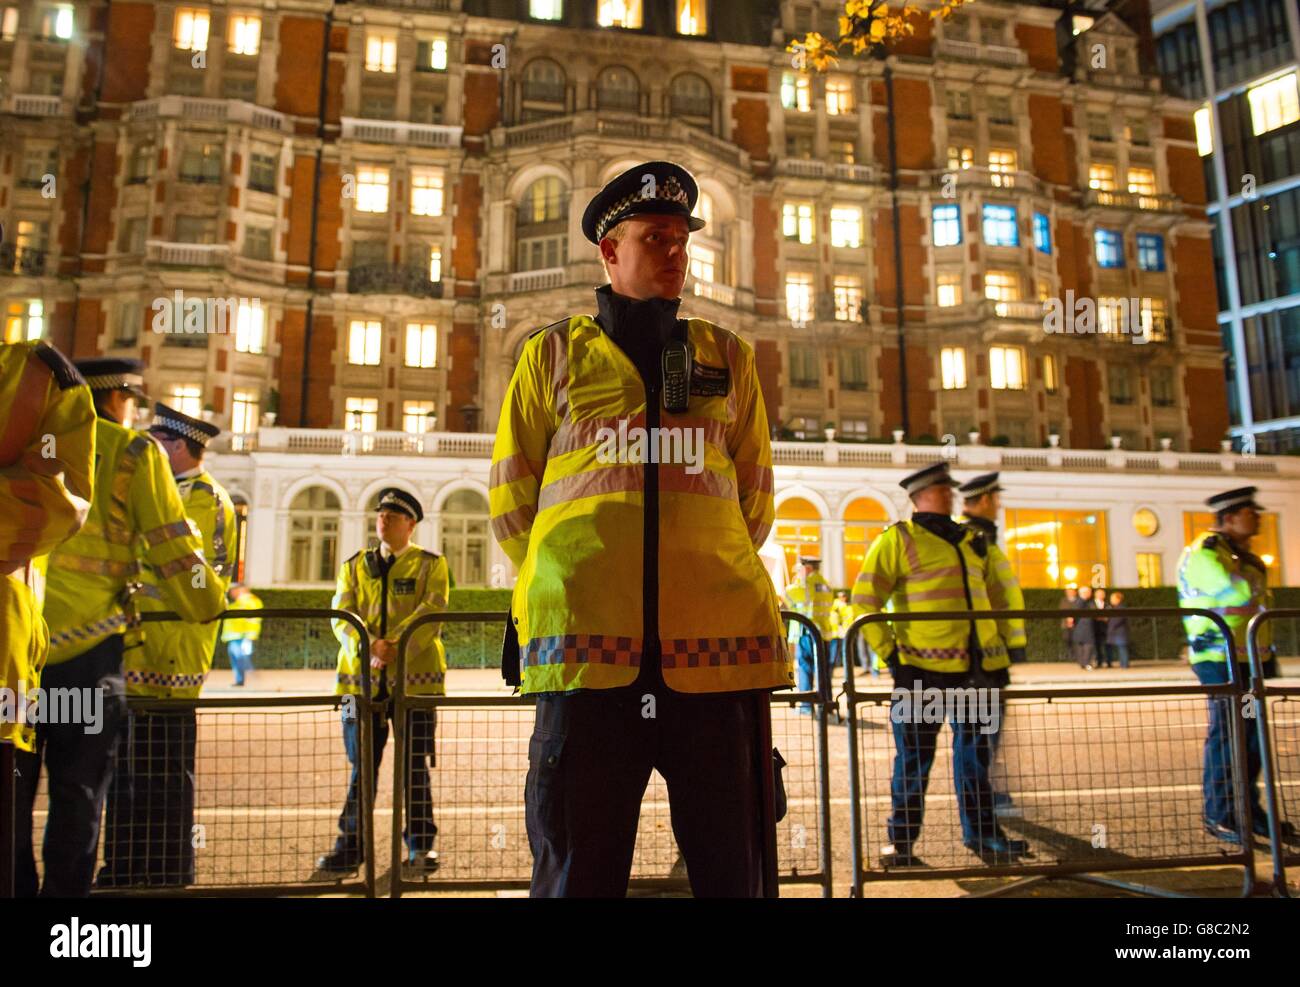 Police outside the Mandarin Oriental Hotel, in Knightsbridge, London, where President of China Xi Jinping is spending the first night of his state visit to the UK. Stock Photo